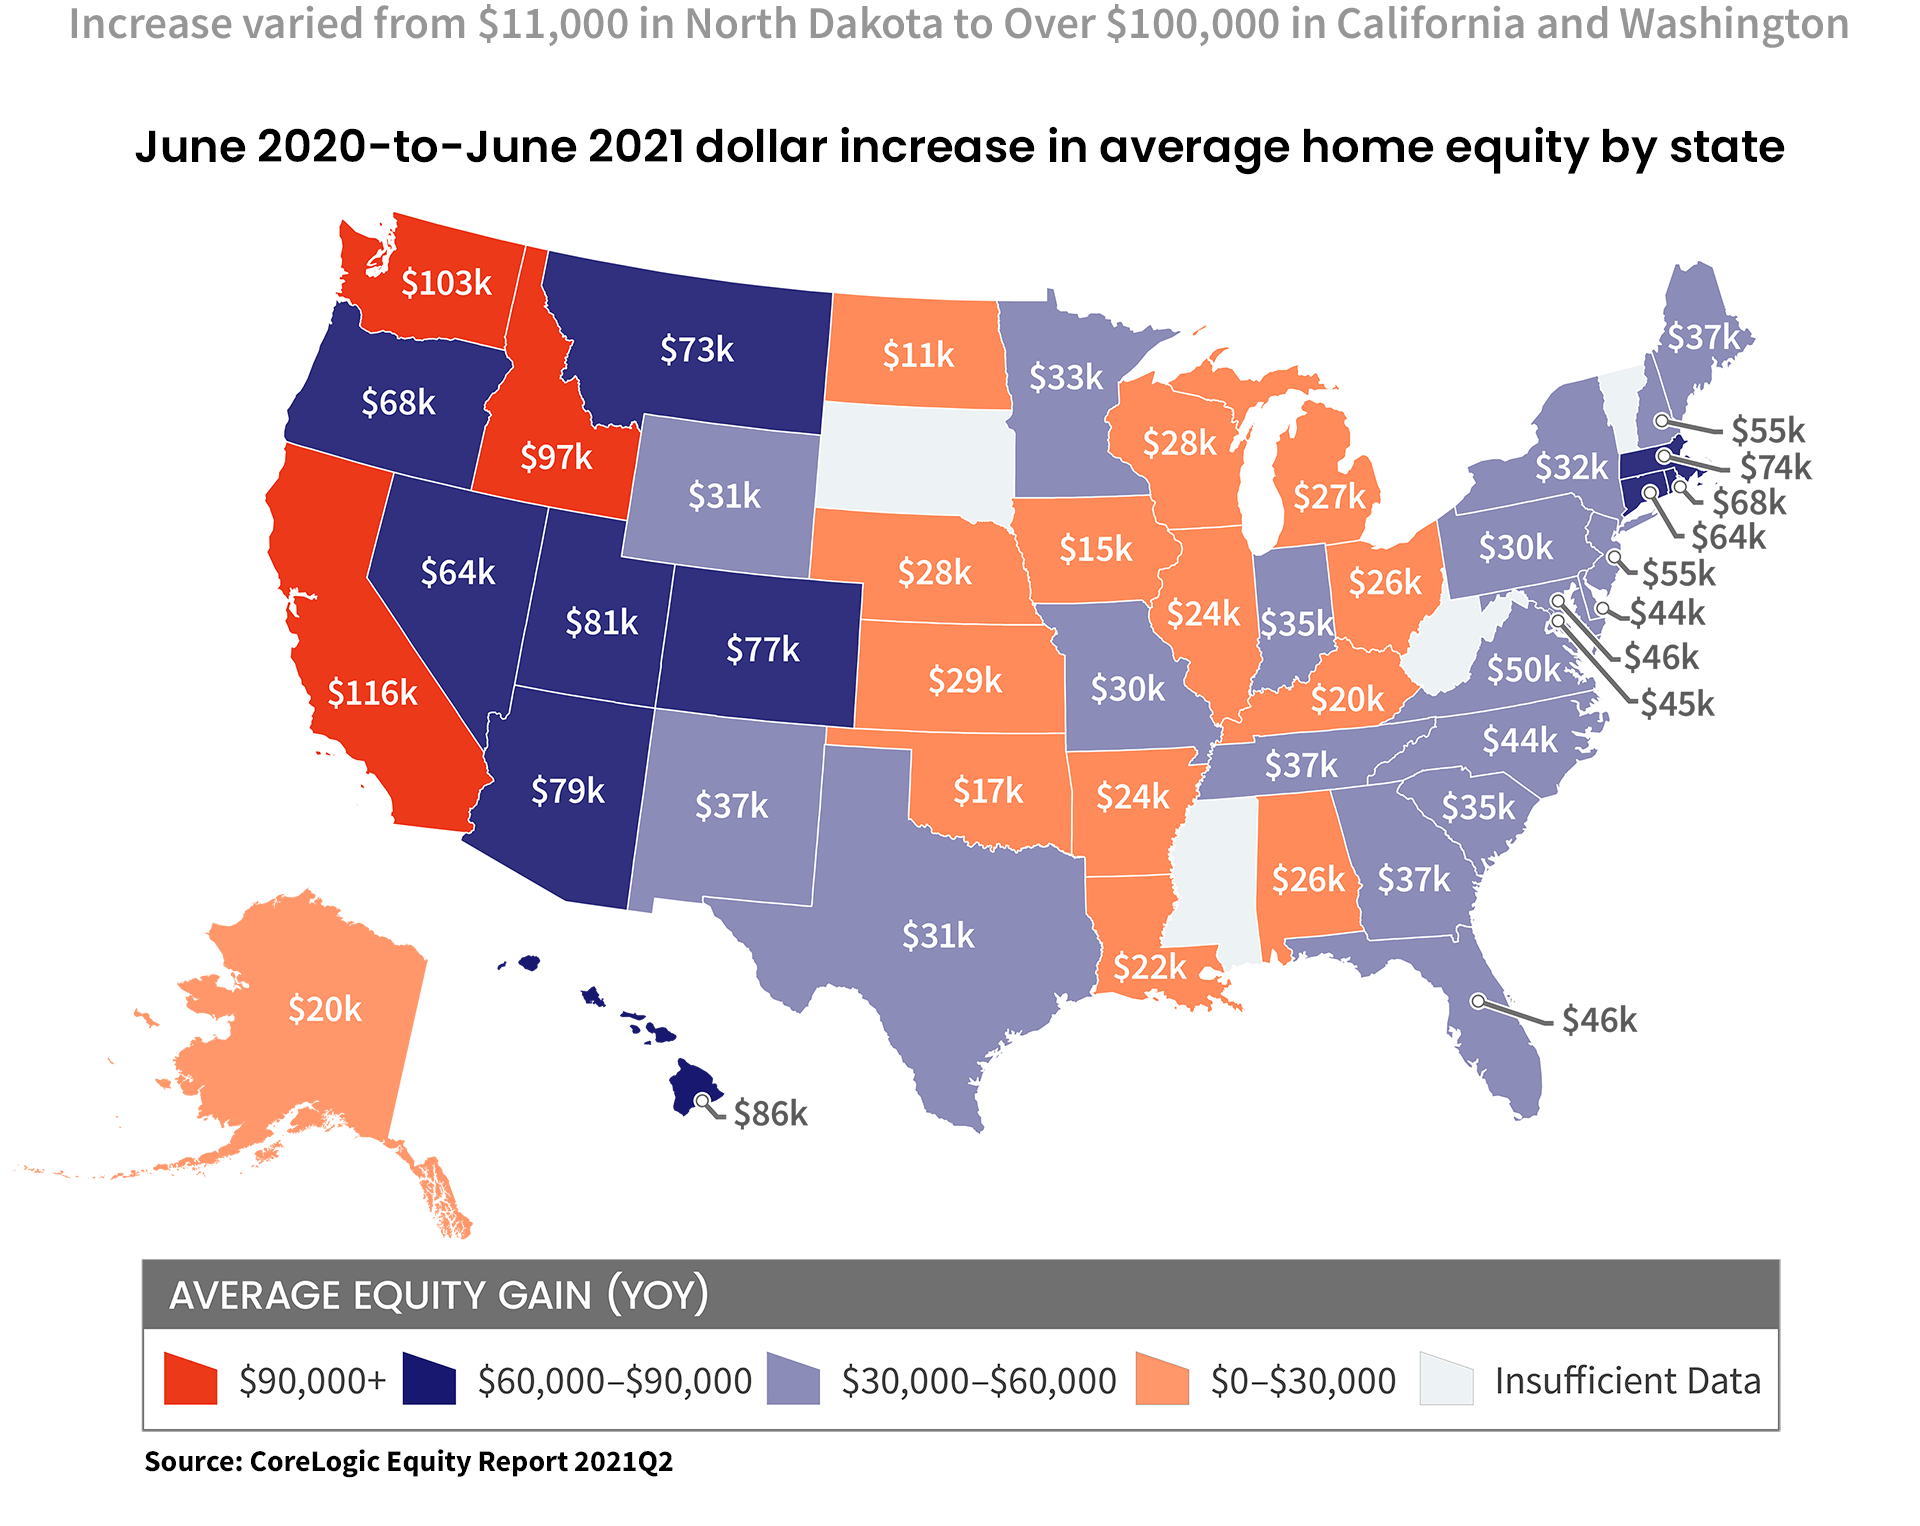 Map showing average equity gain per state